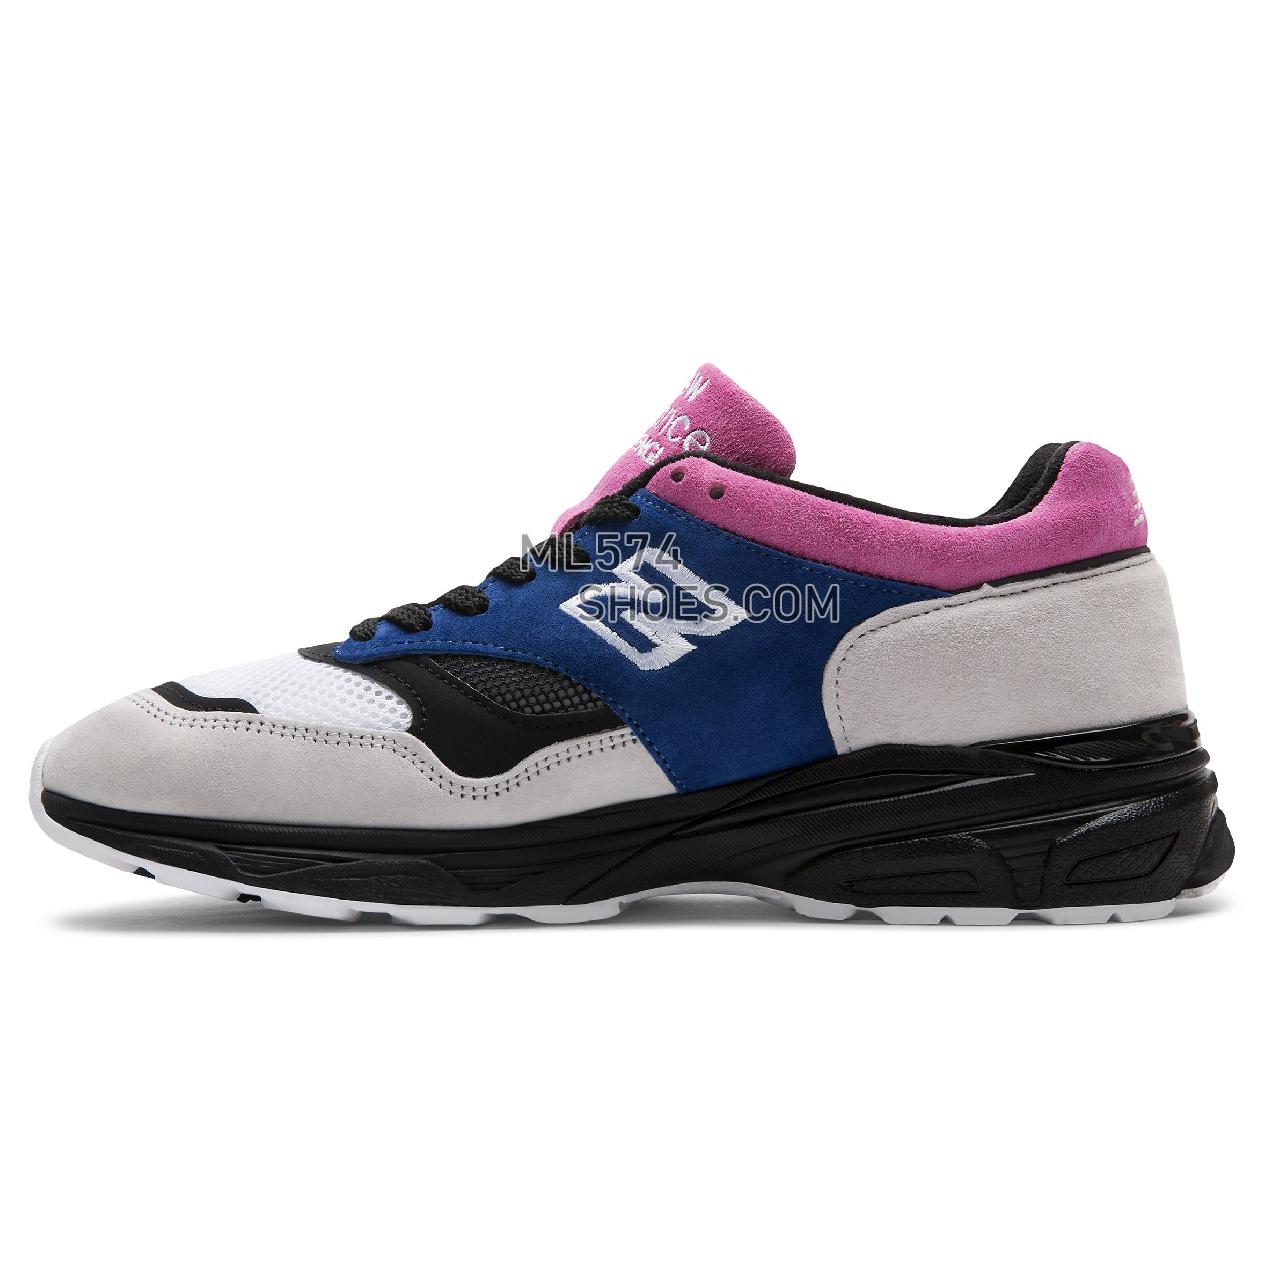 New Balance Made in UK 1500.9 - Men's 1500.9 Made in UK - Pink with Blue and Black - M15009SC